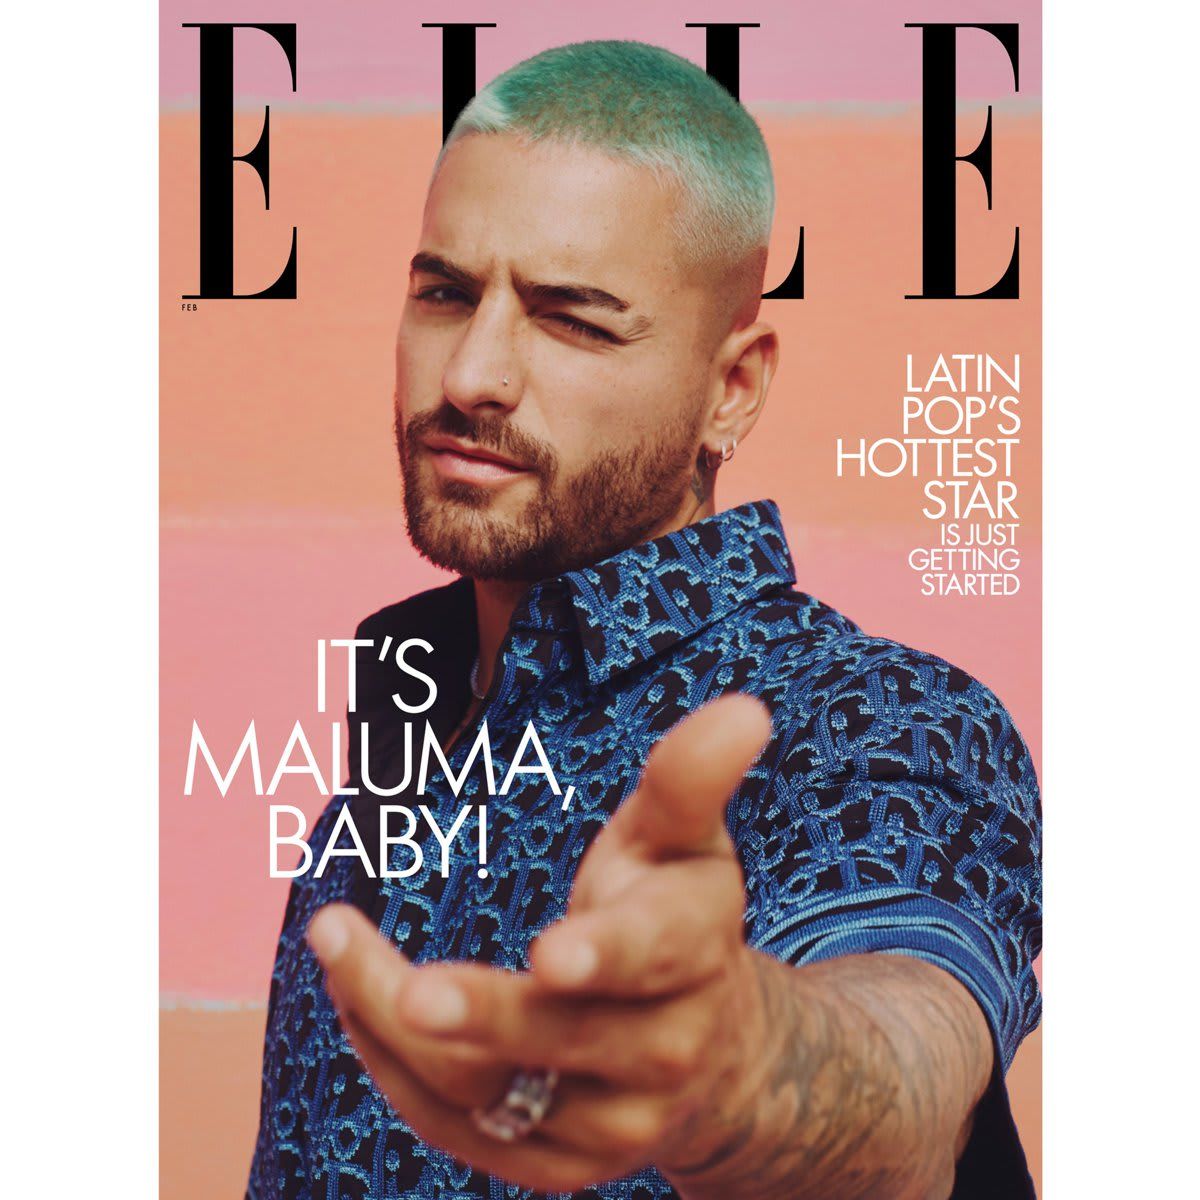 Maluma is ELLE's first ever male solo cover star